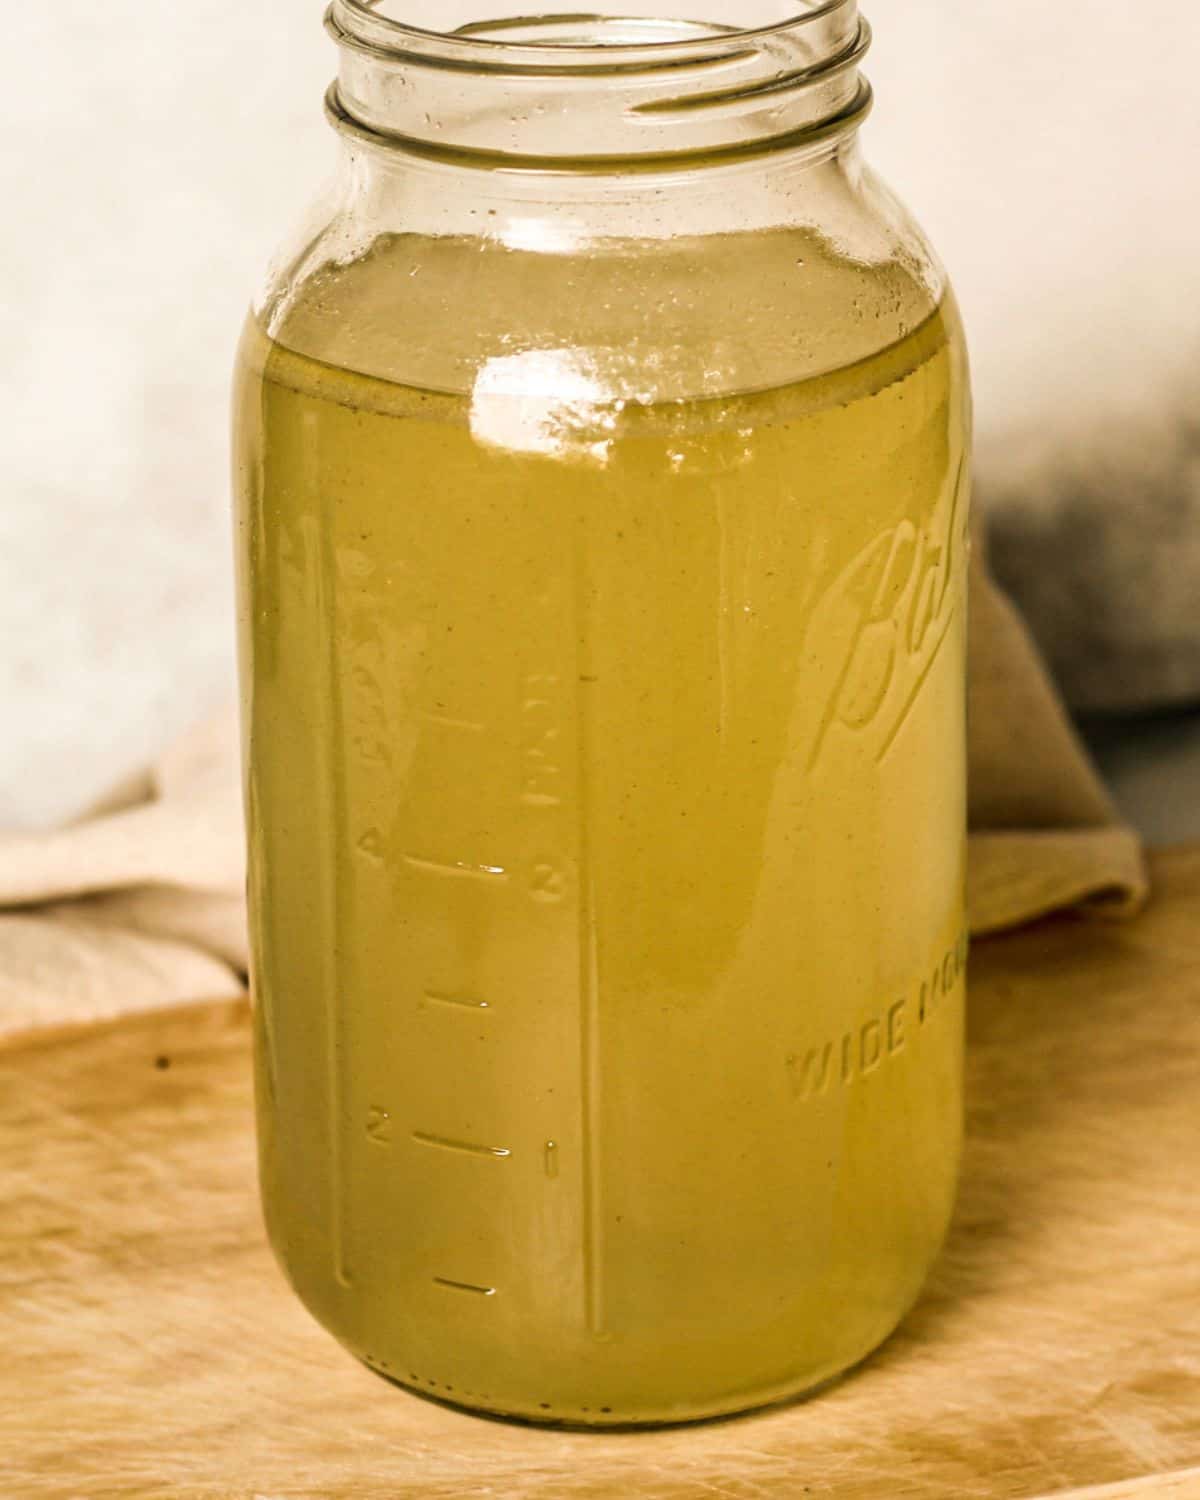 A tall glass jar with yellow broth on a wooden cutting board.